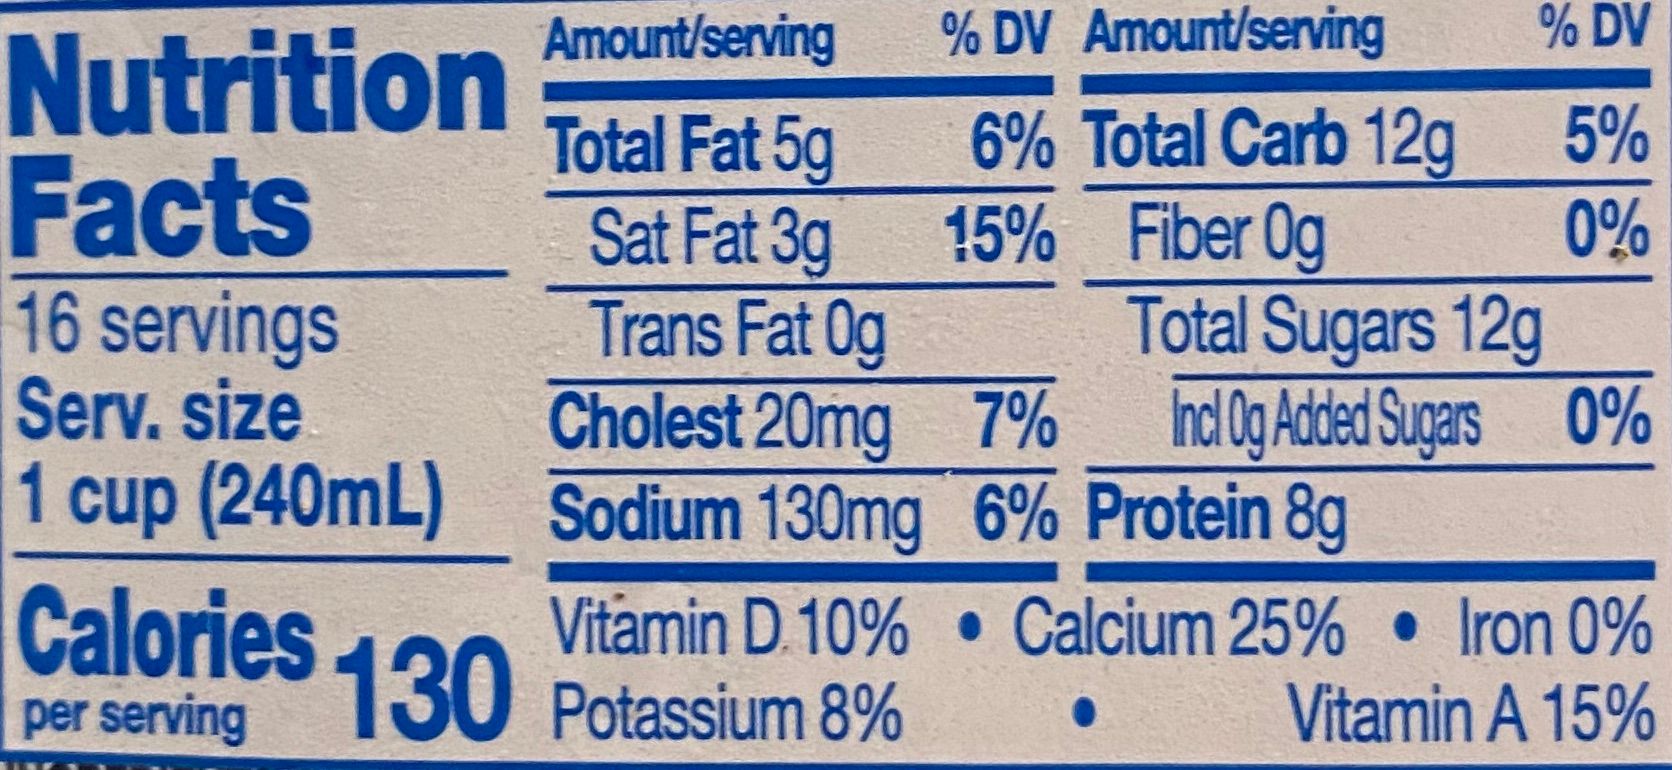 Nutrition Facts panel for part-skimmed milk.